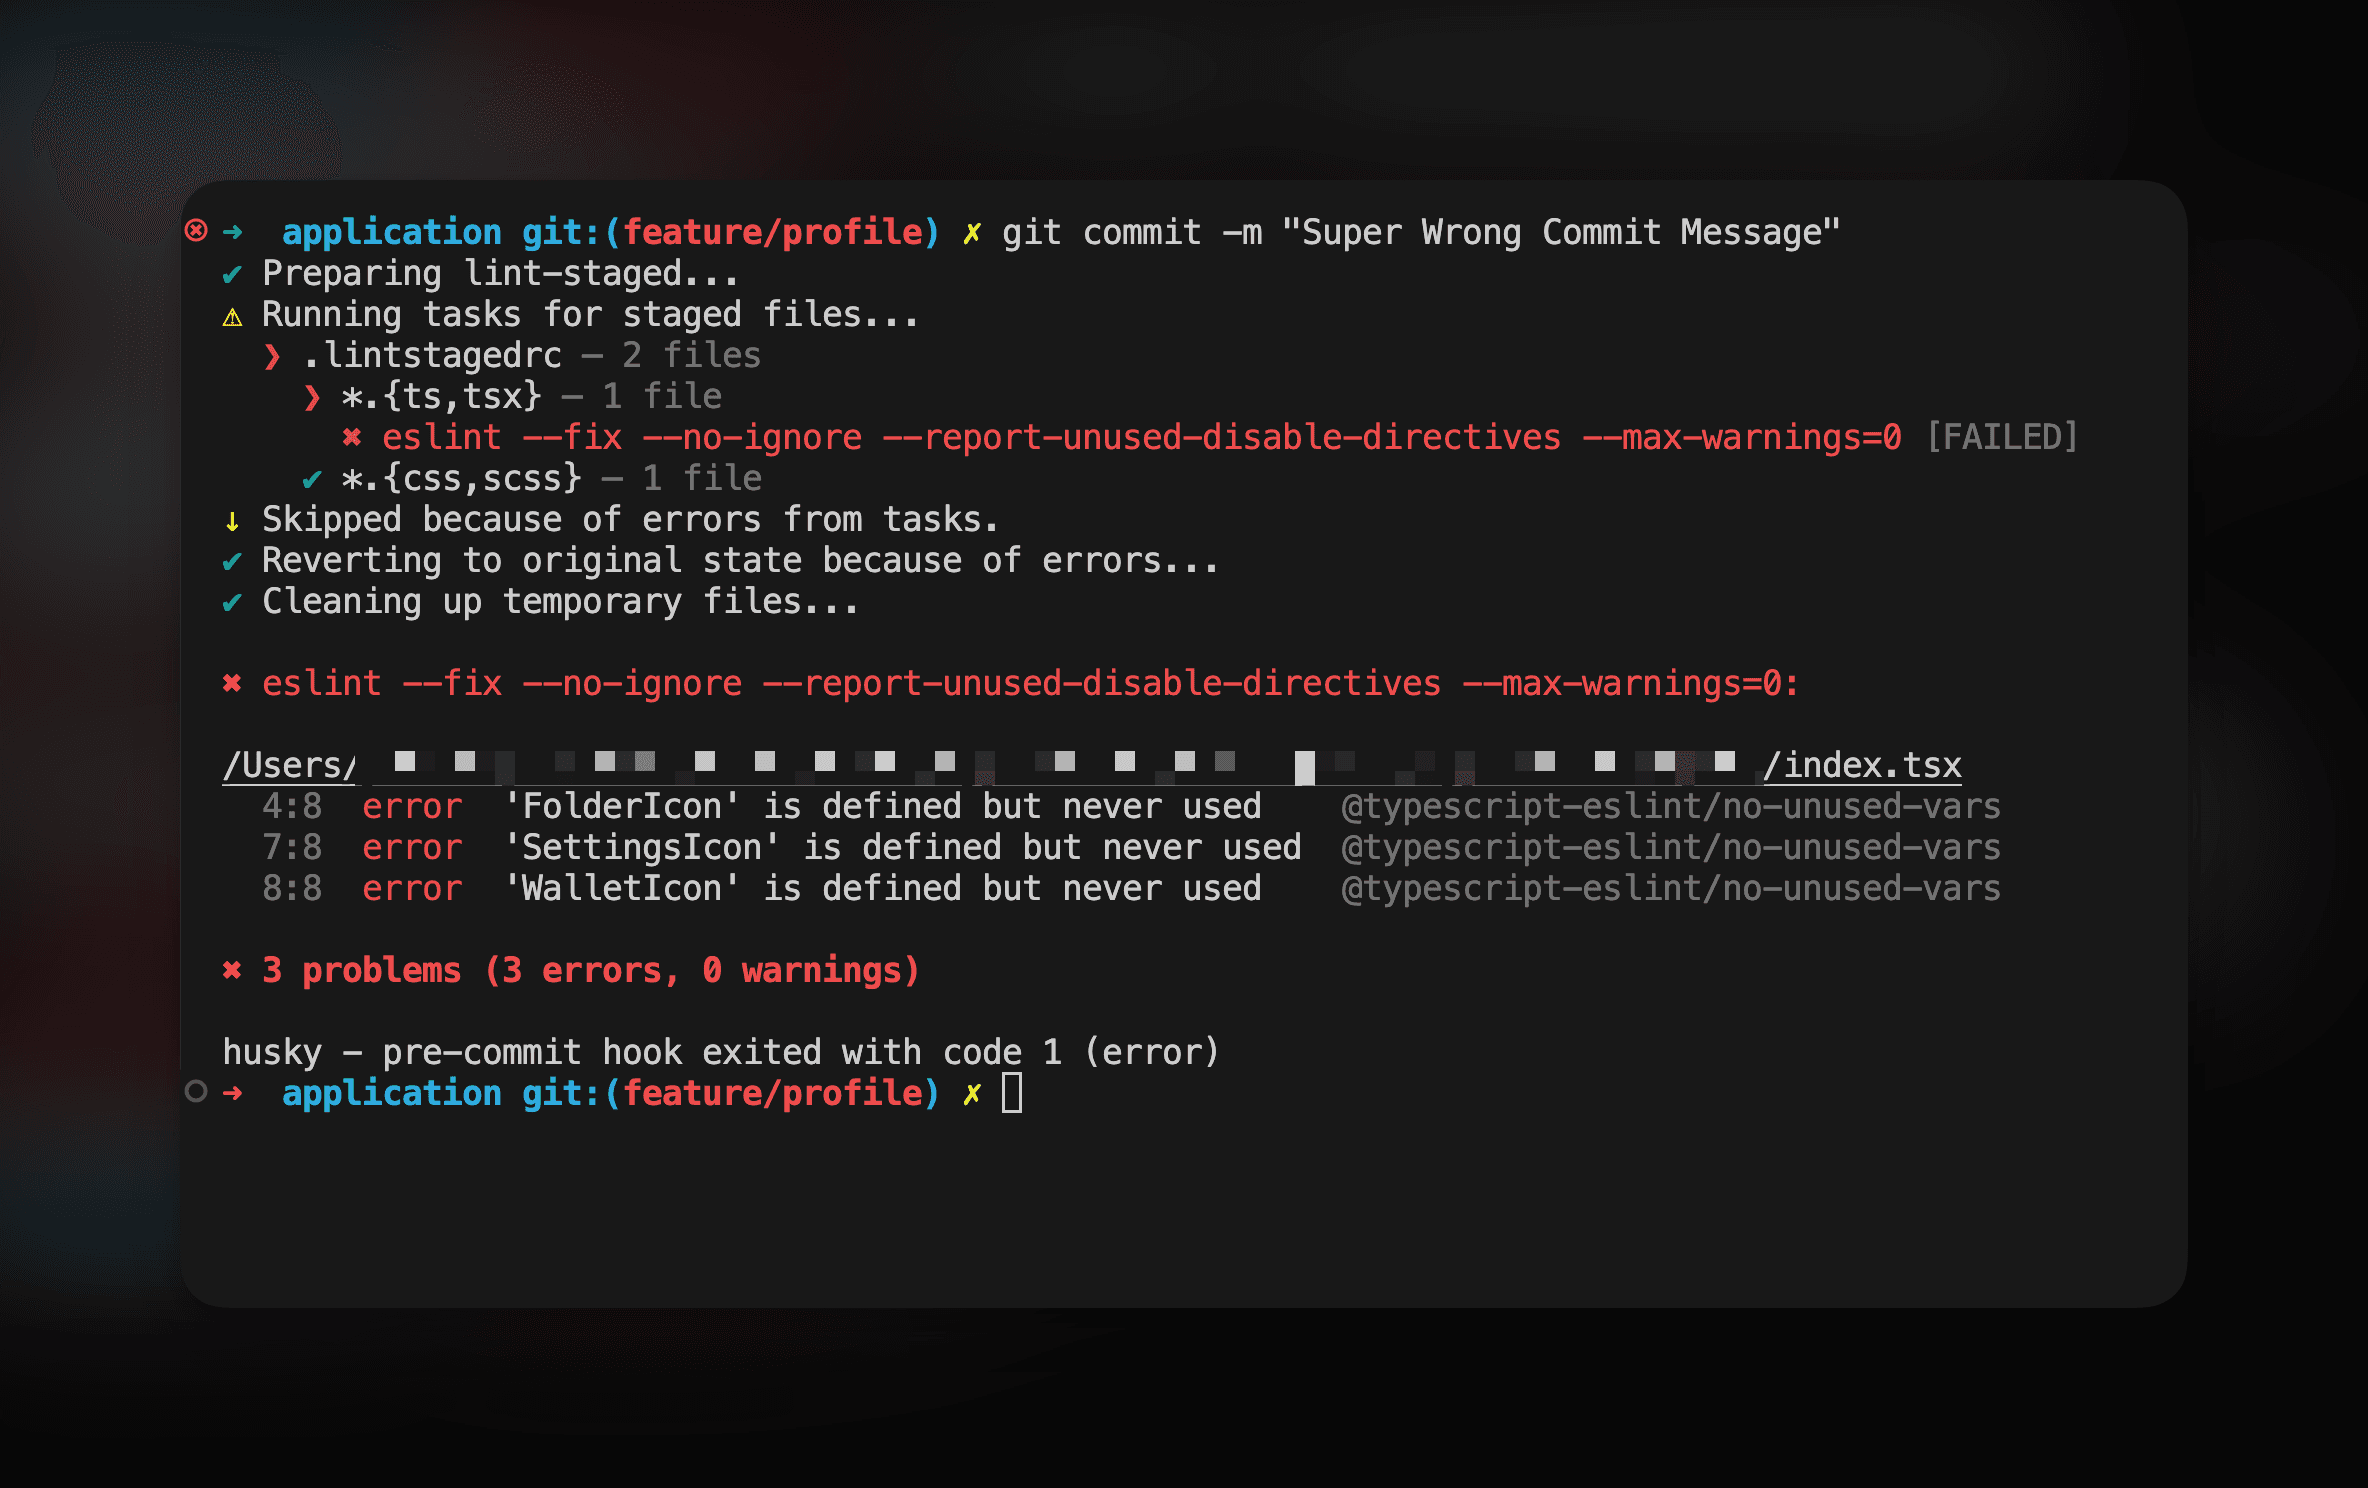 The result of lint-staged work in terminal